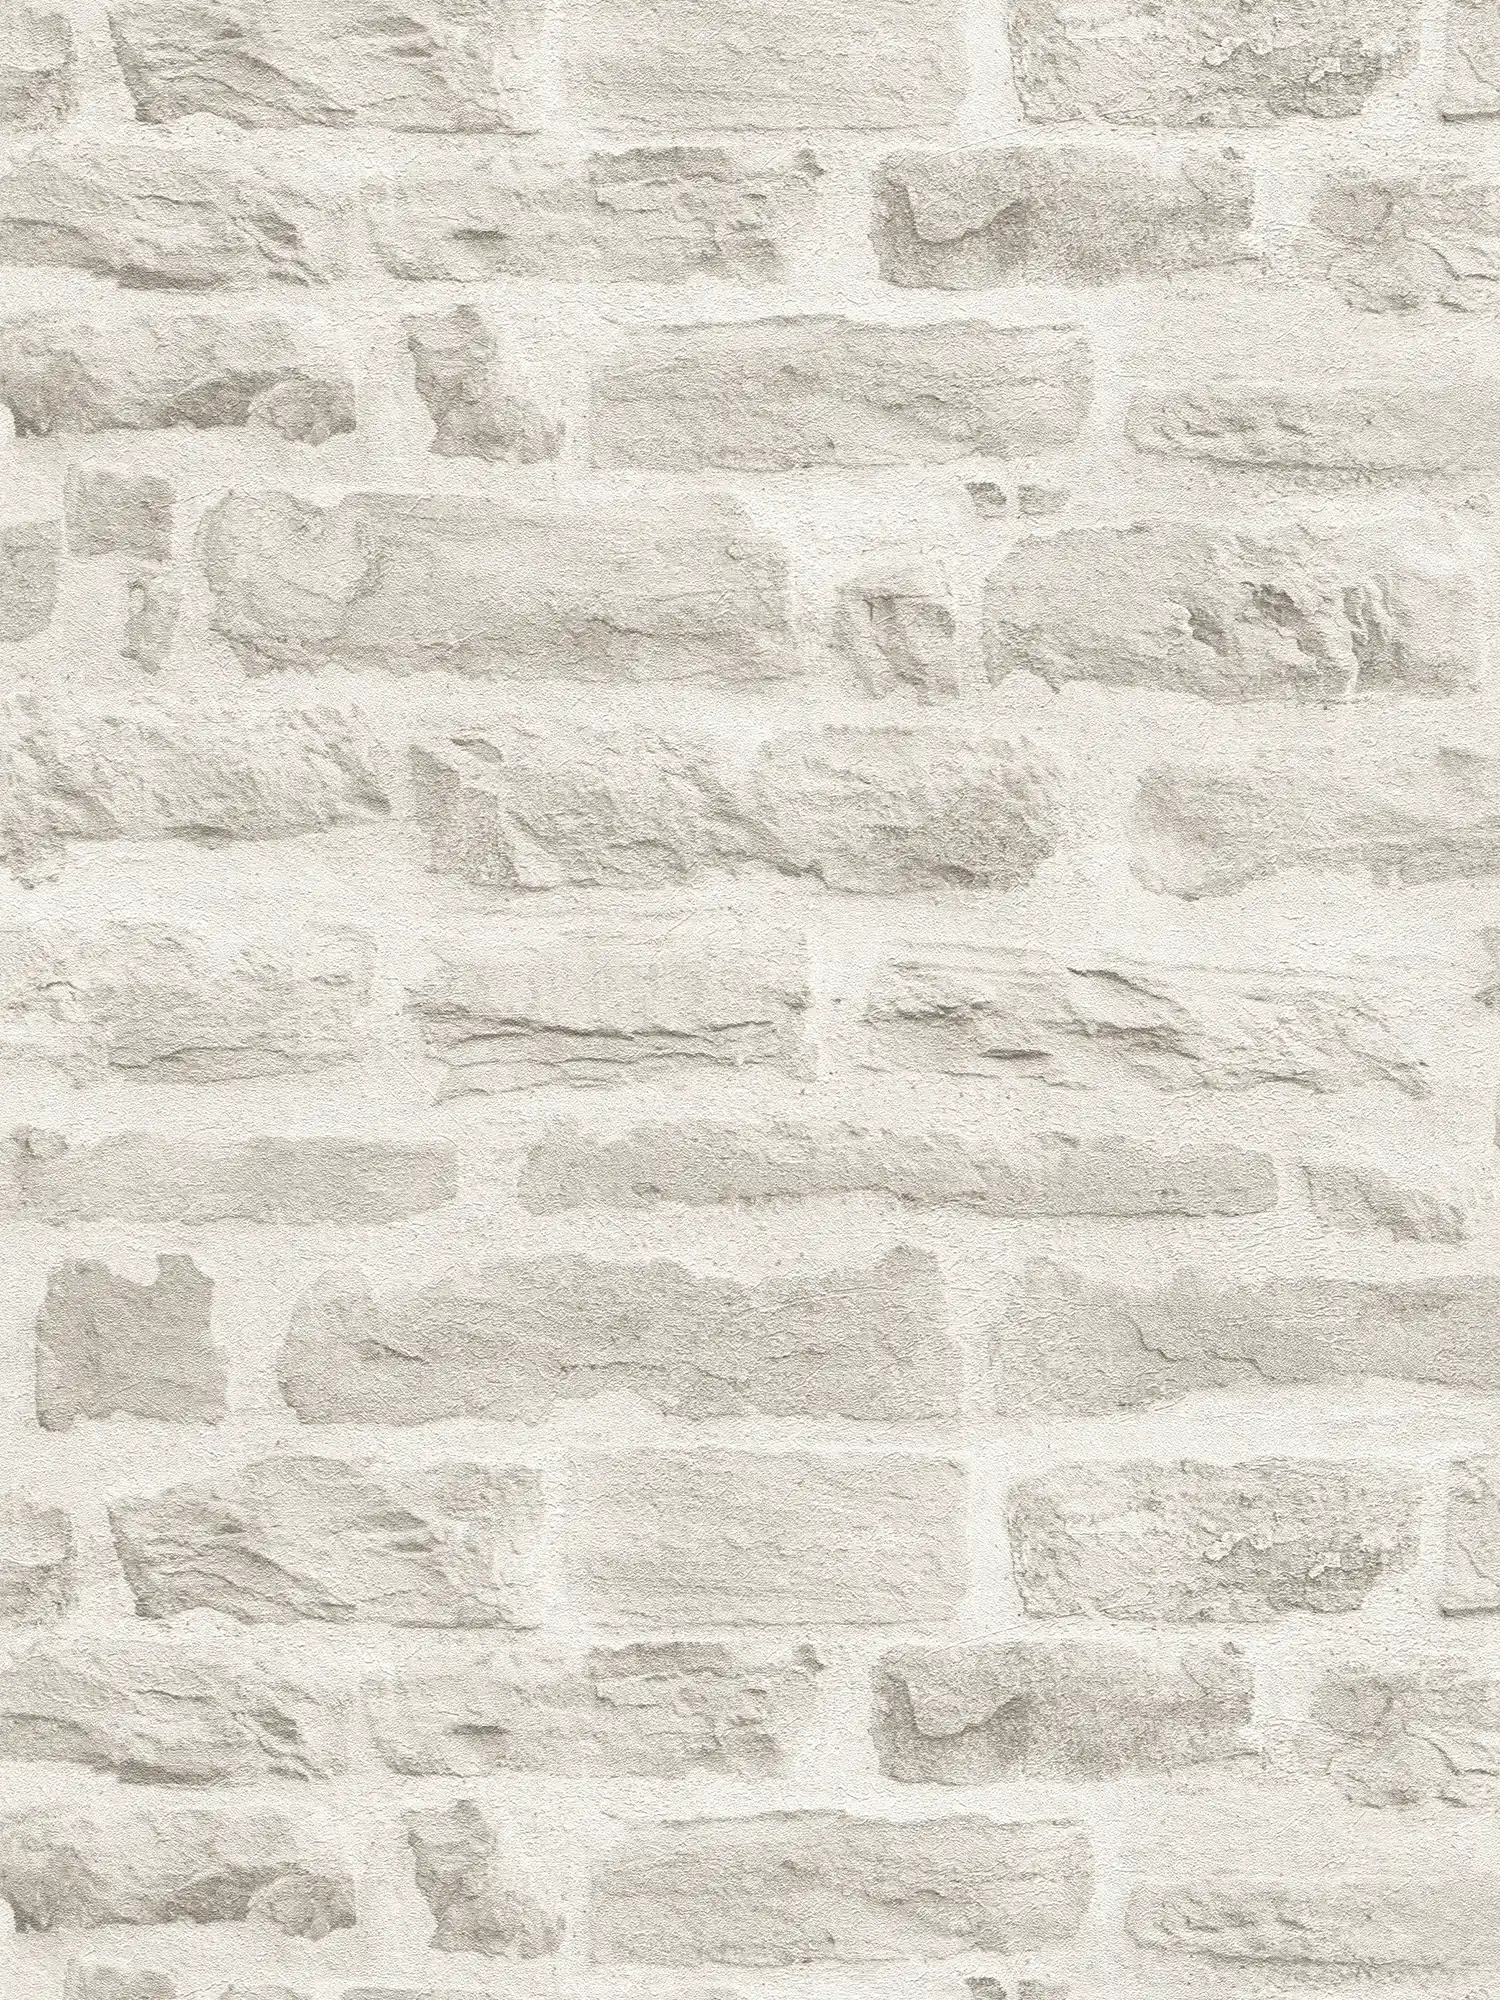 Wallpaper with grey natural stone pattern - grey
